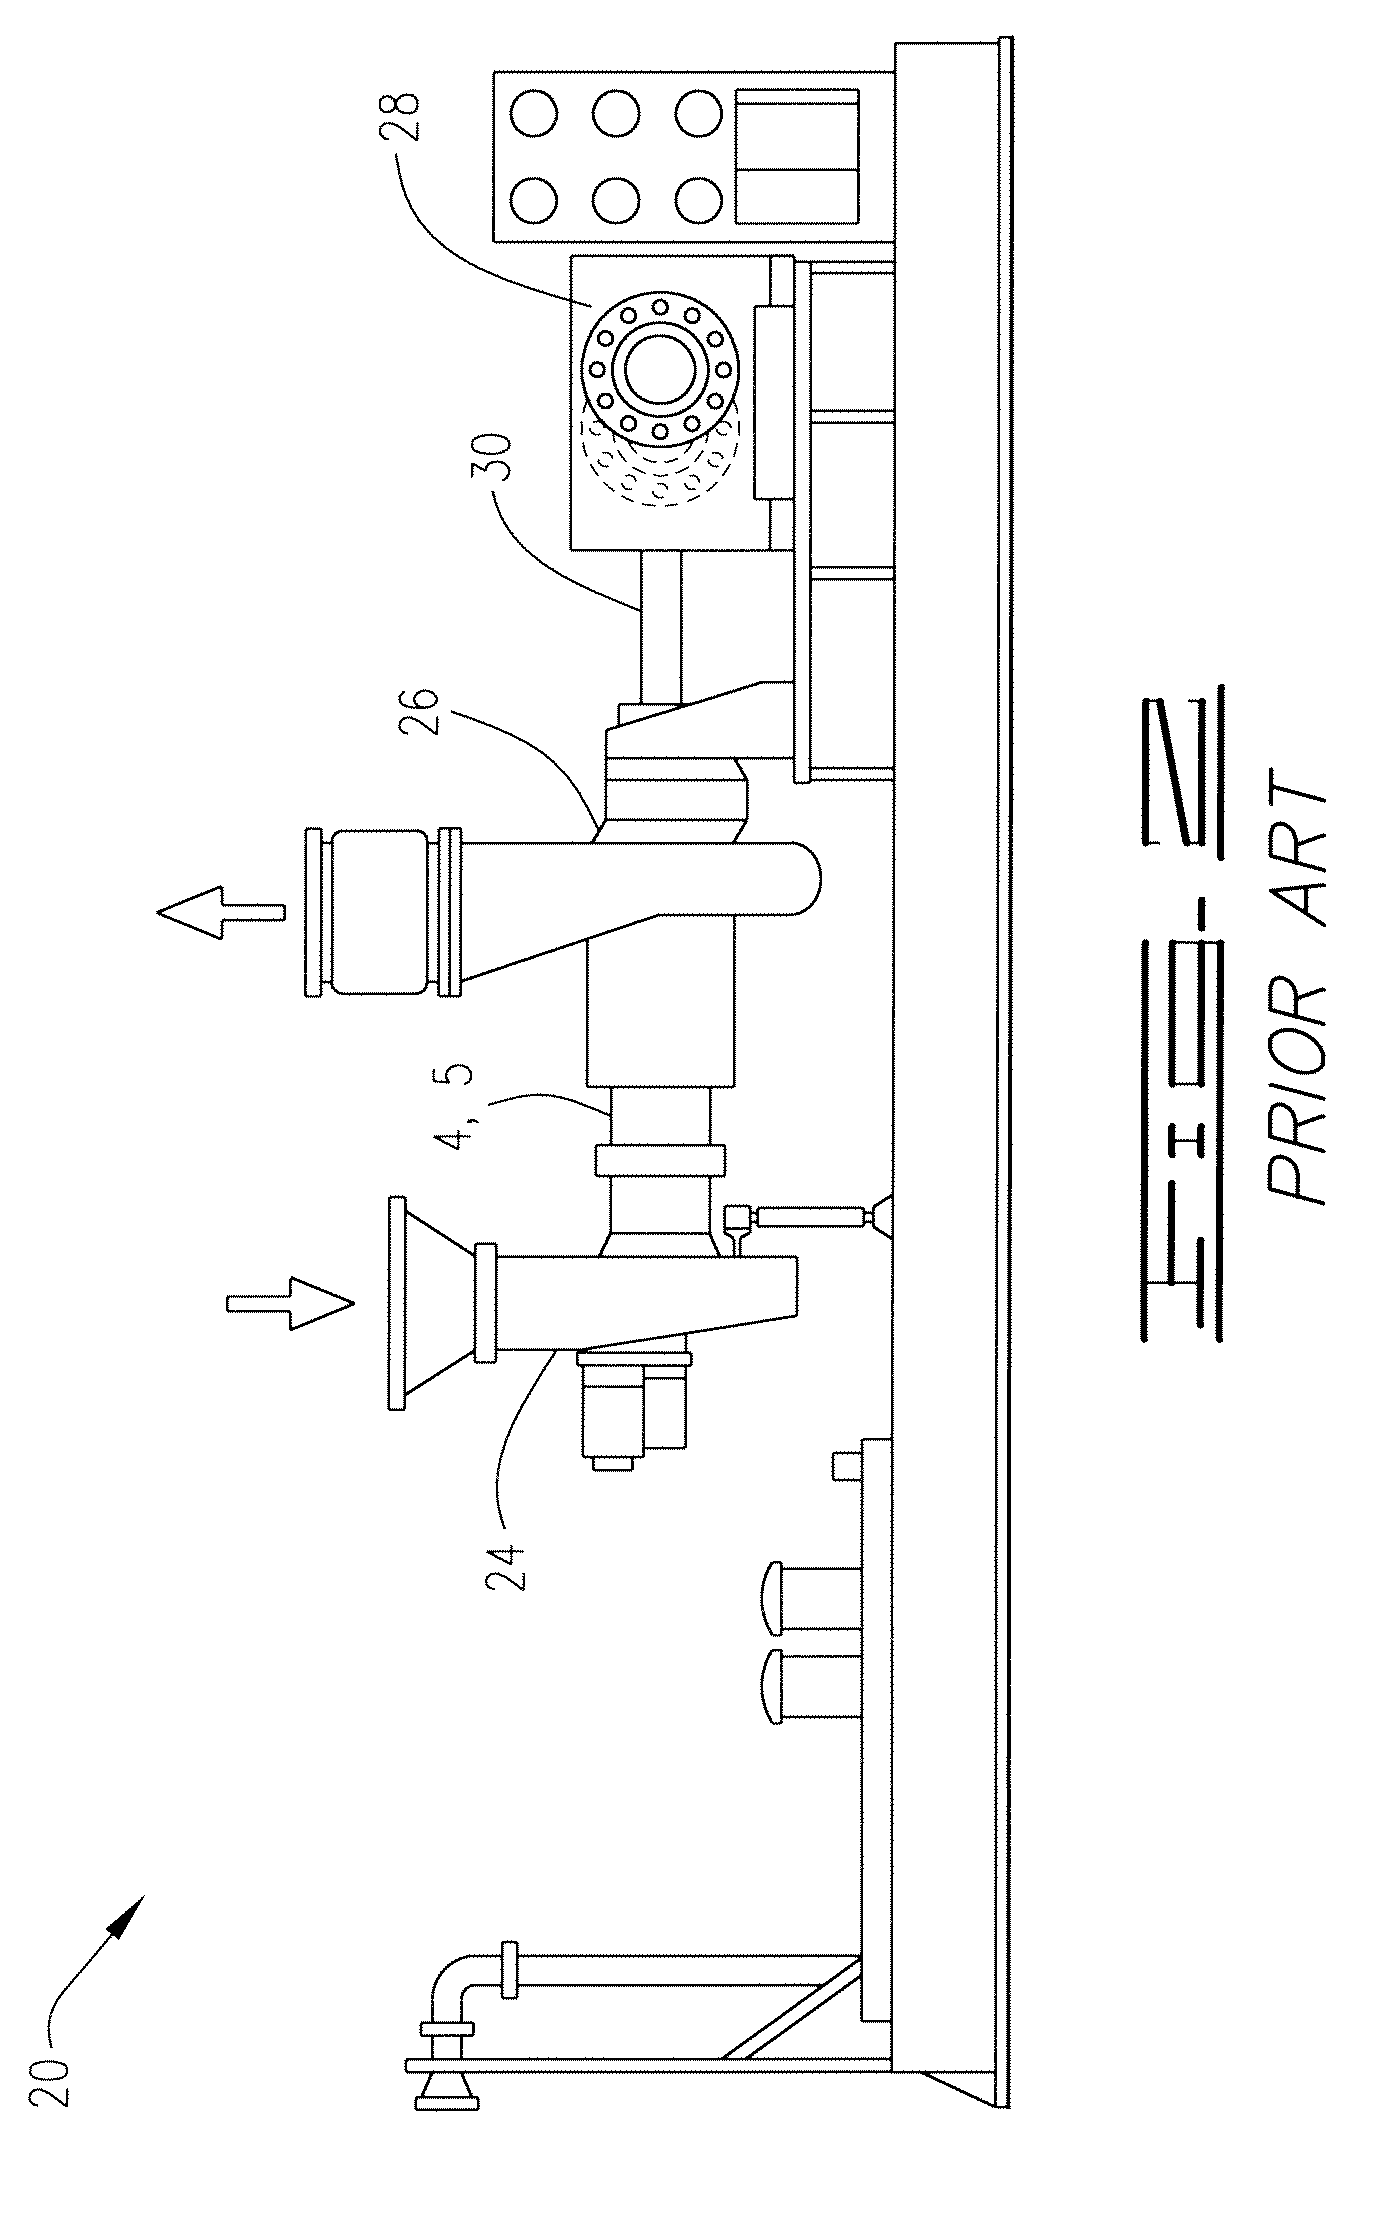 Method and apparatus for boosting gas turbine engine performance